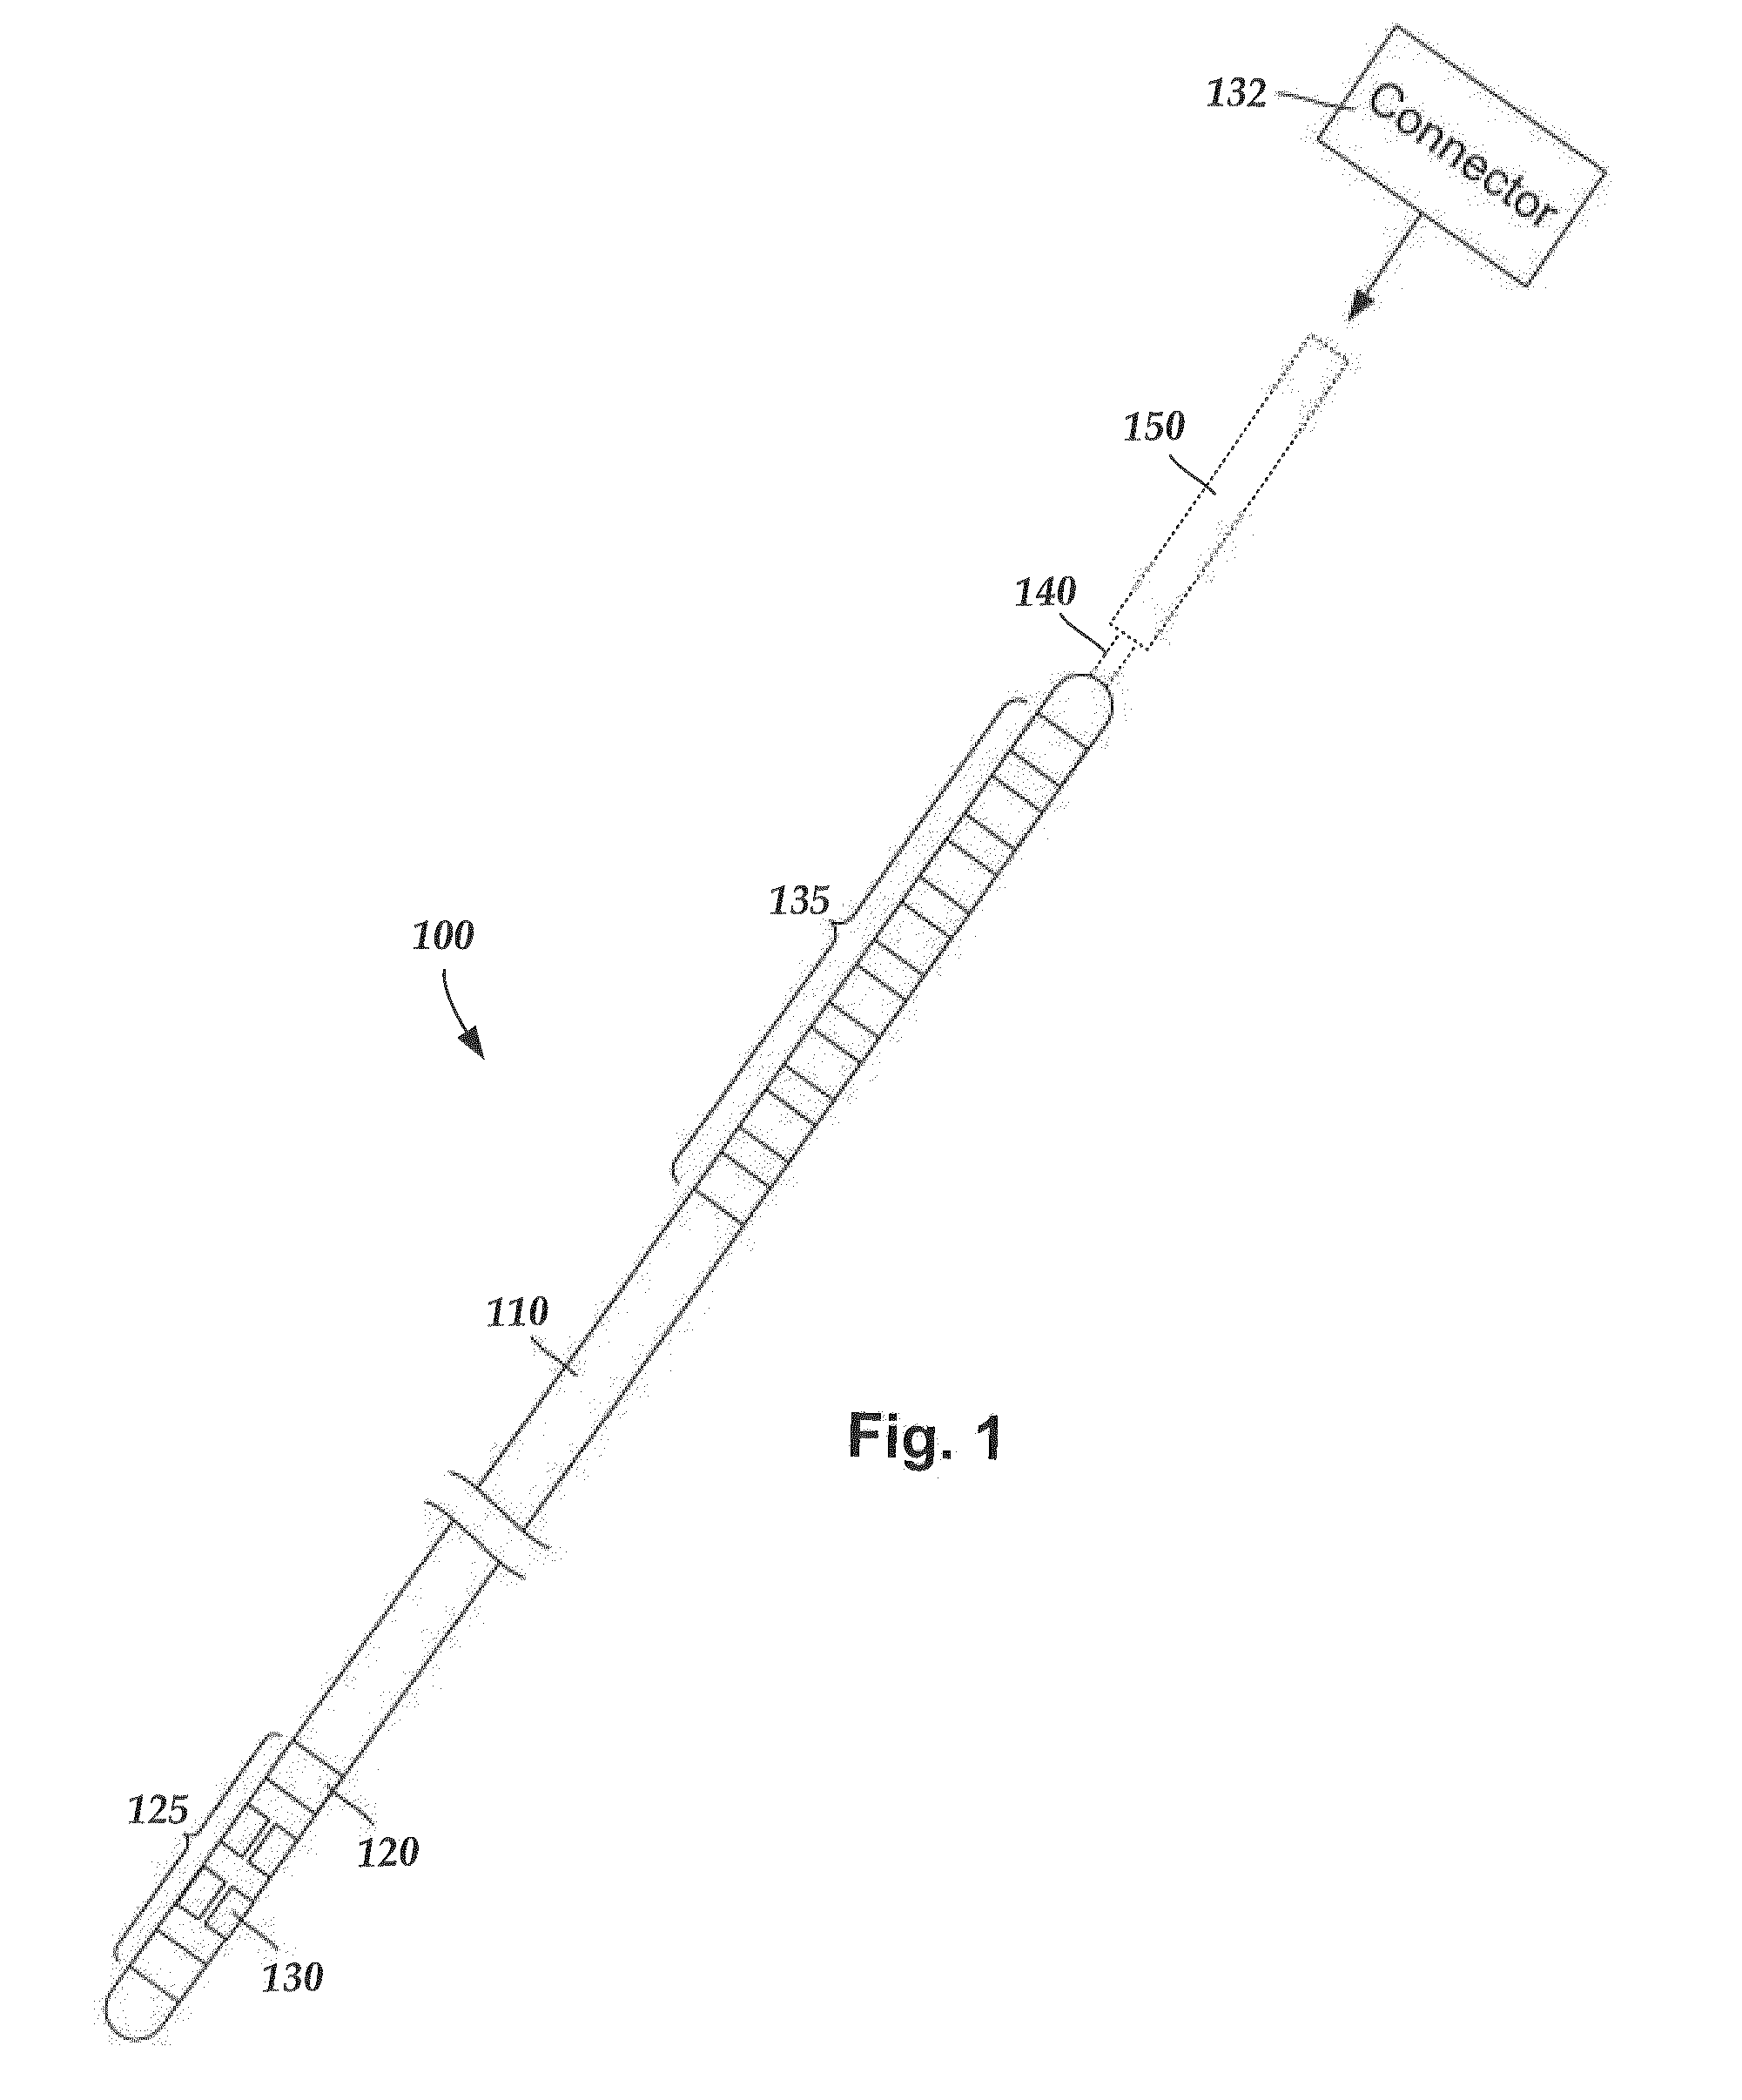 Leads containing segmented electrodes with non-perpendicular legs and methods of making and using